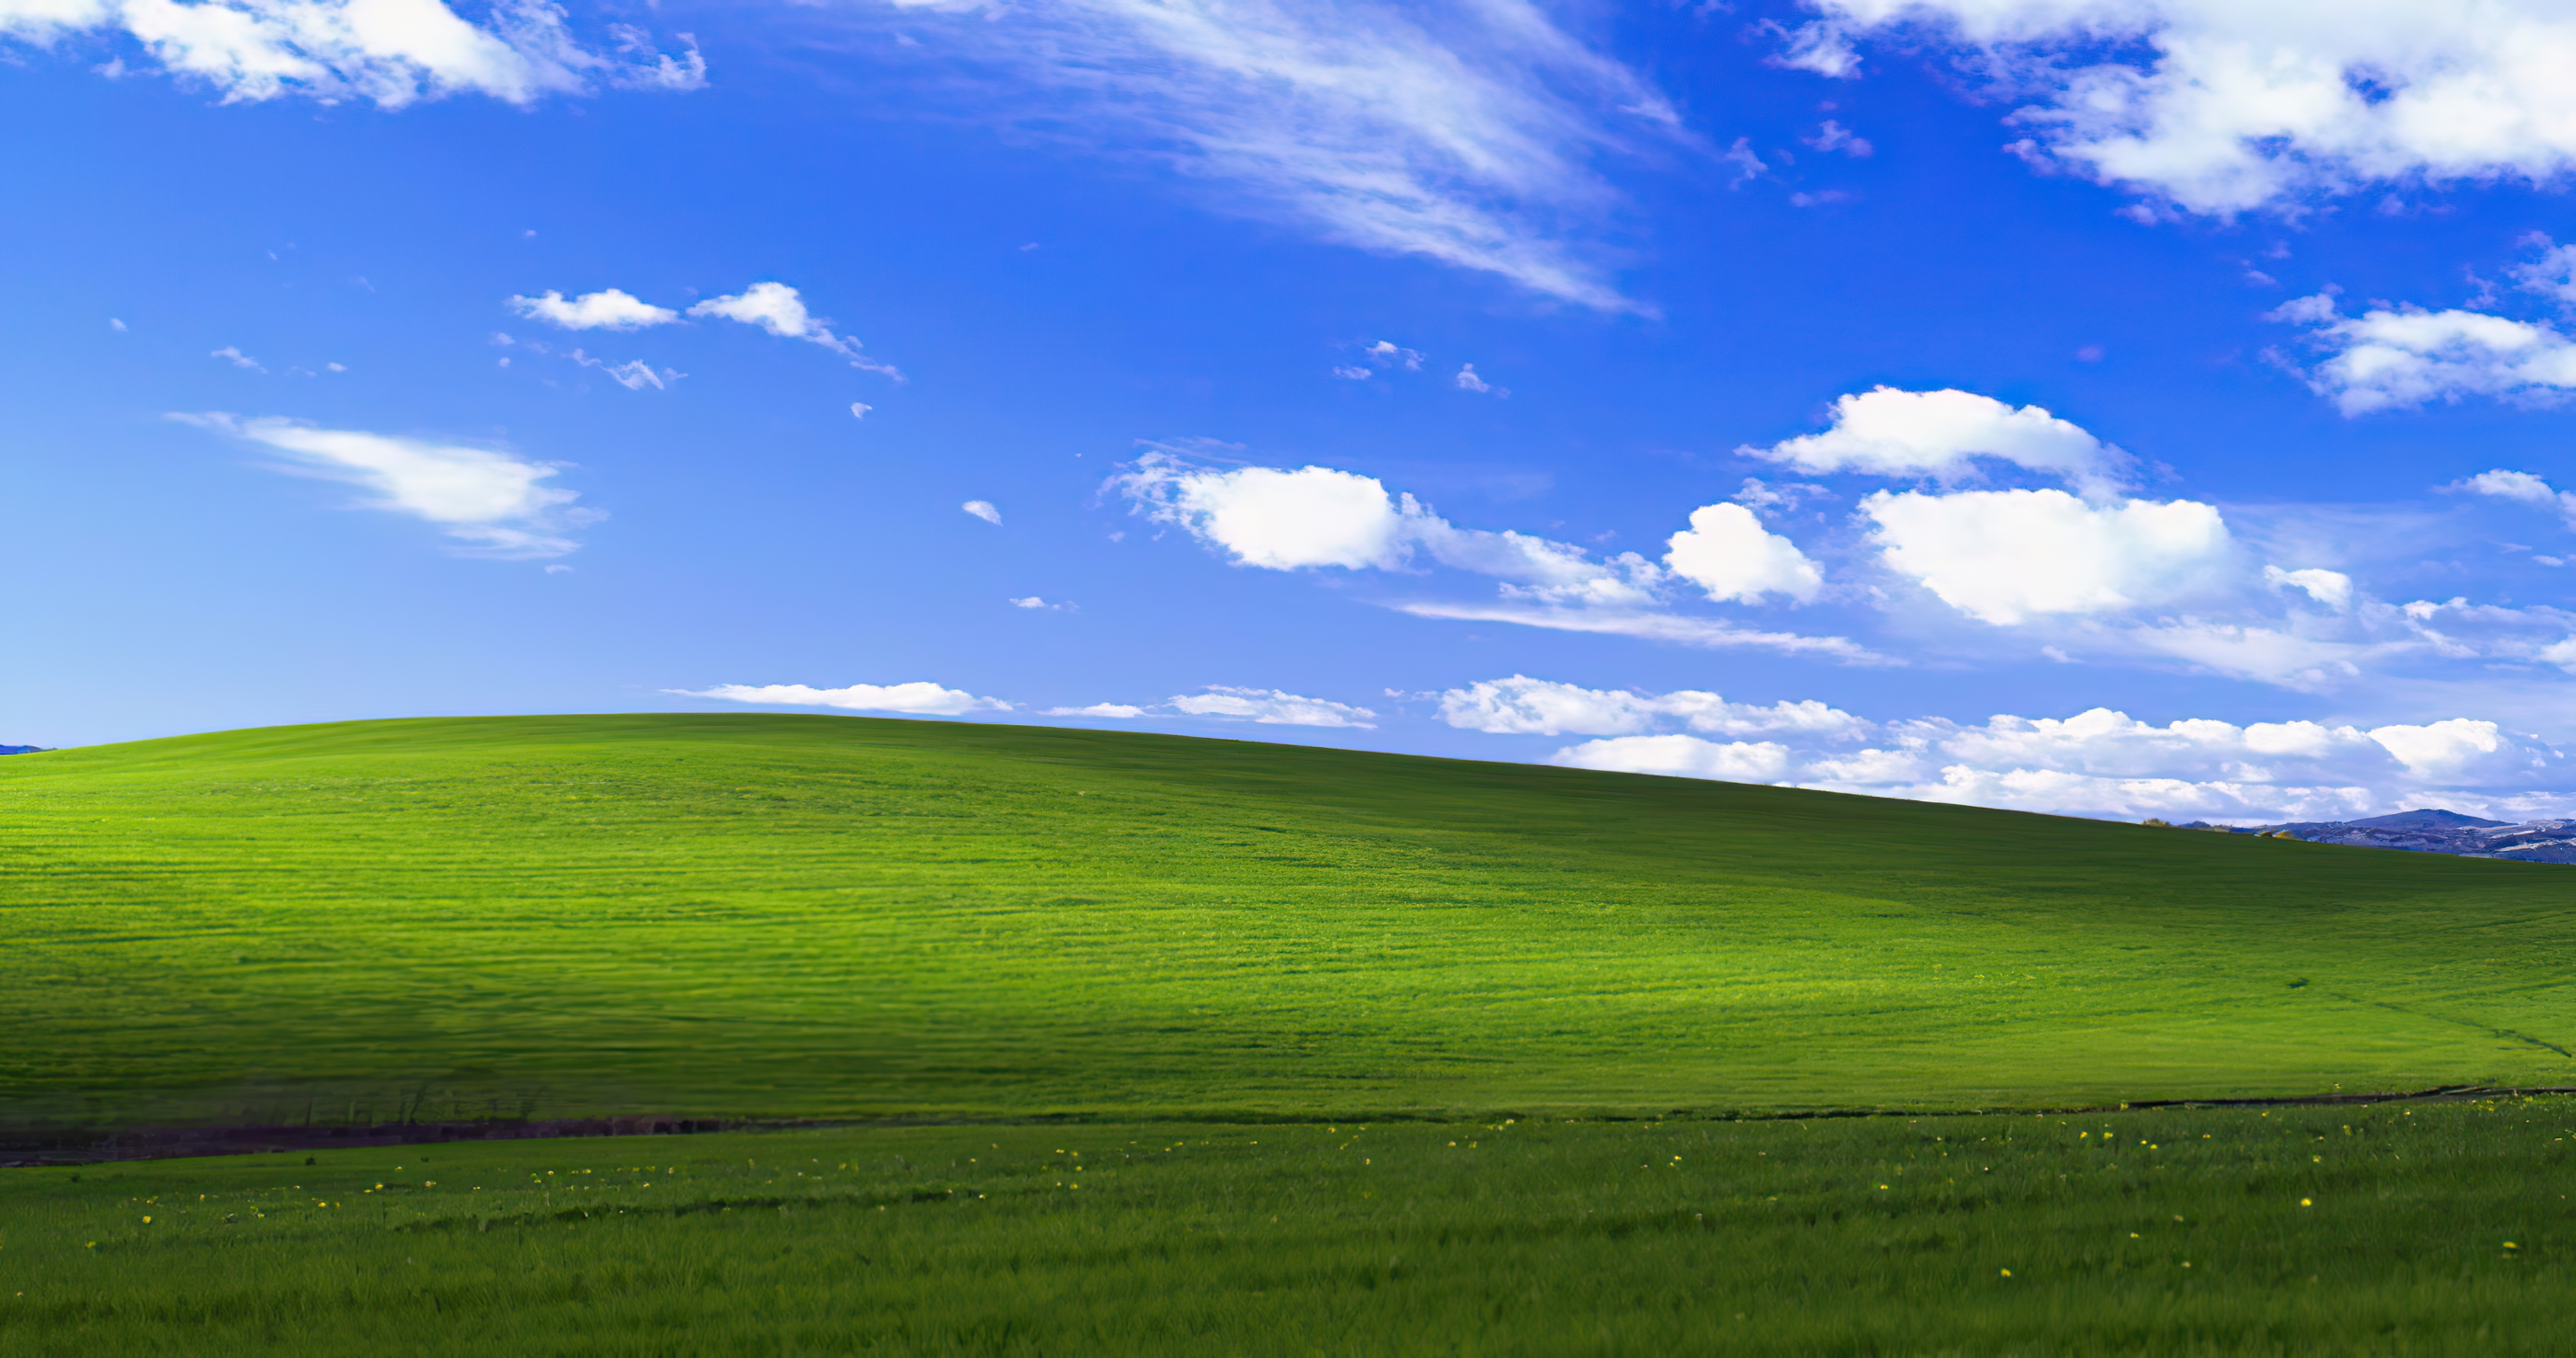 I upscaled the Windows XP wallpaper (Bliss) to 8k